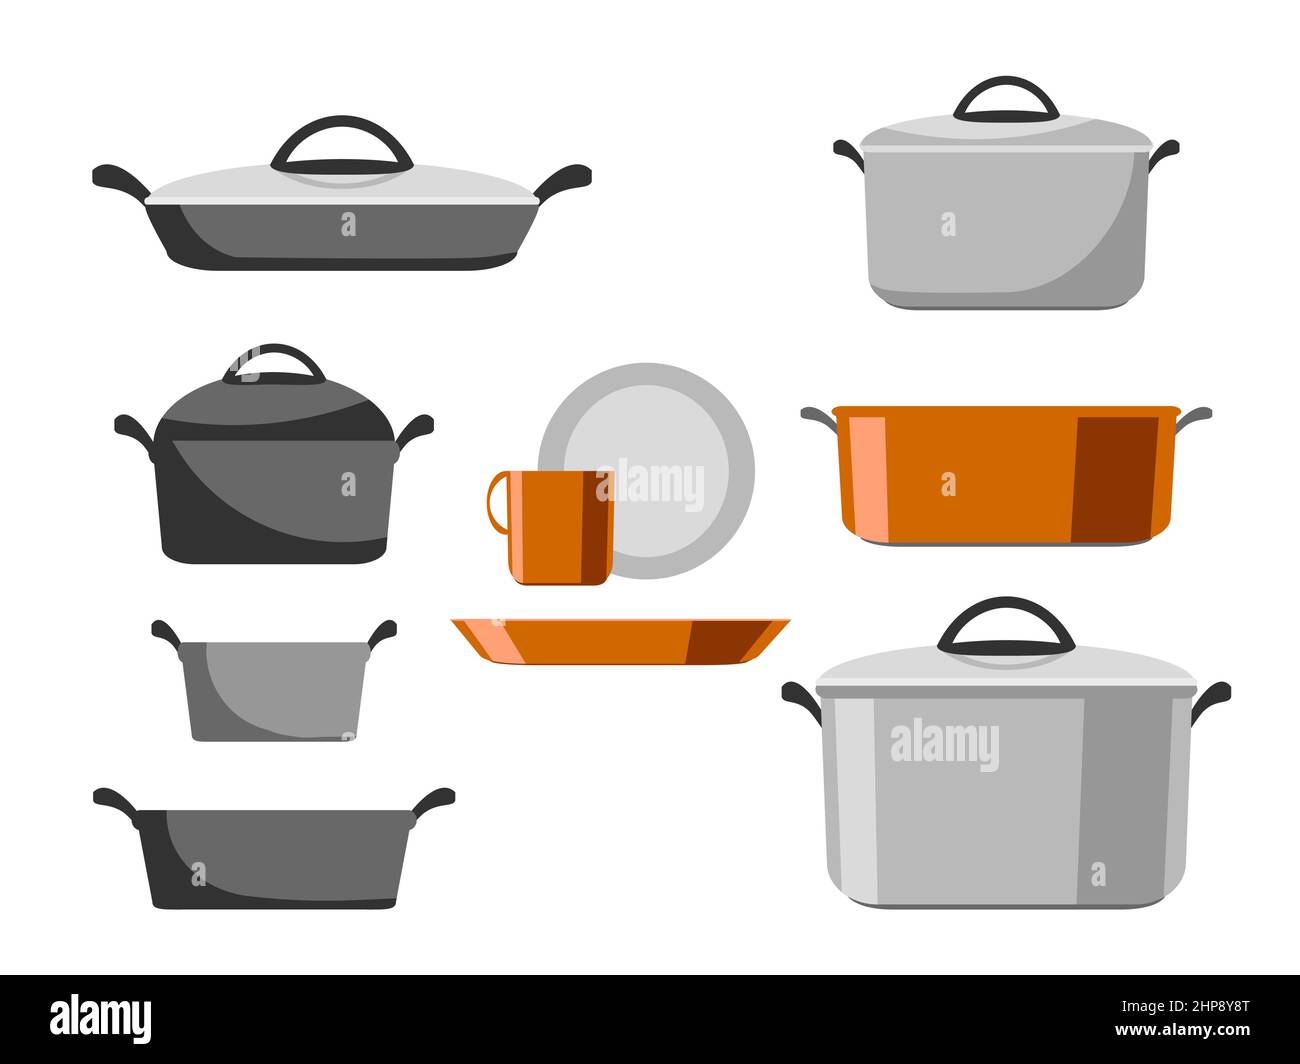 Cartoon stainless and non-stick cookware set, pots, pans, saucepans and utensils tools cooking isolated on white background, vector illustration. Kitchen icons objects elements for boiling and frying Stock Vector